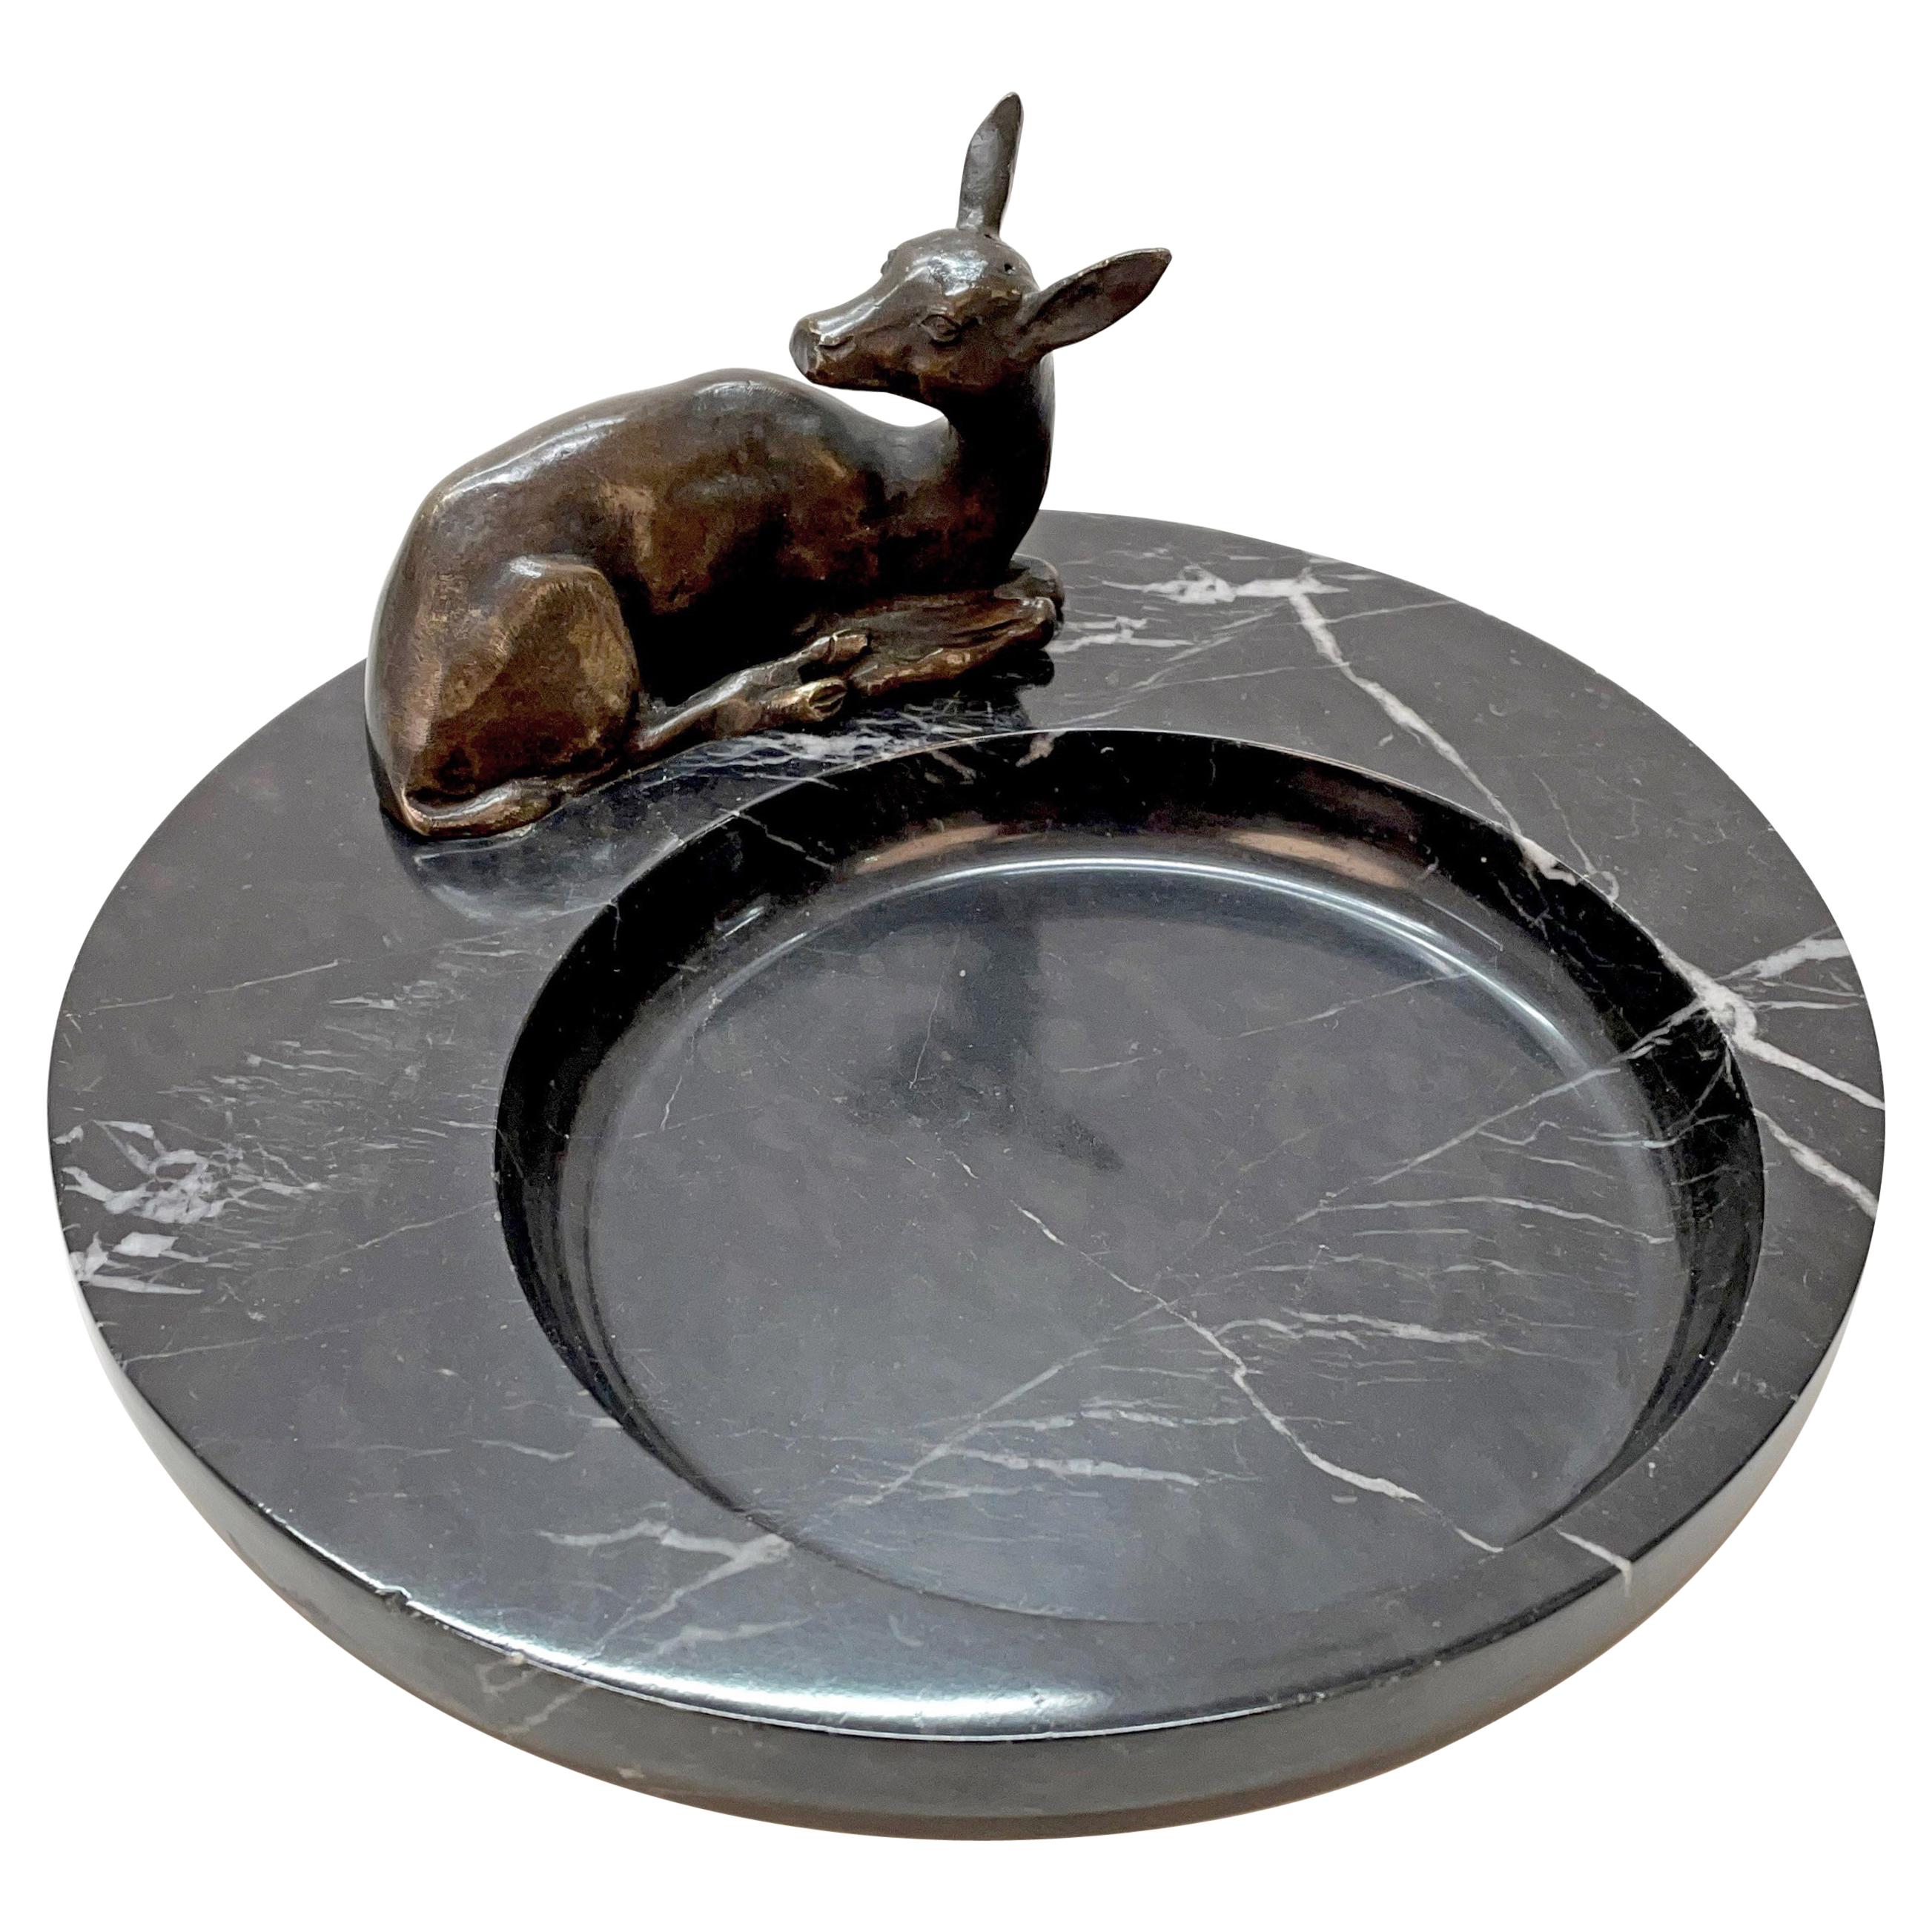 Midcentury Bronze and Black Marble Italian Ashtray with Deer Sculpture, 1930s